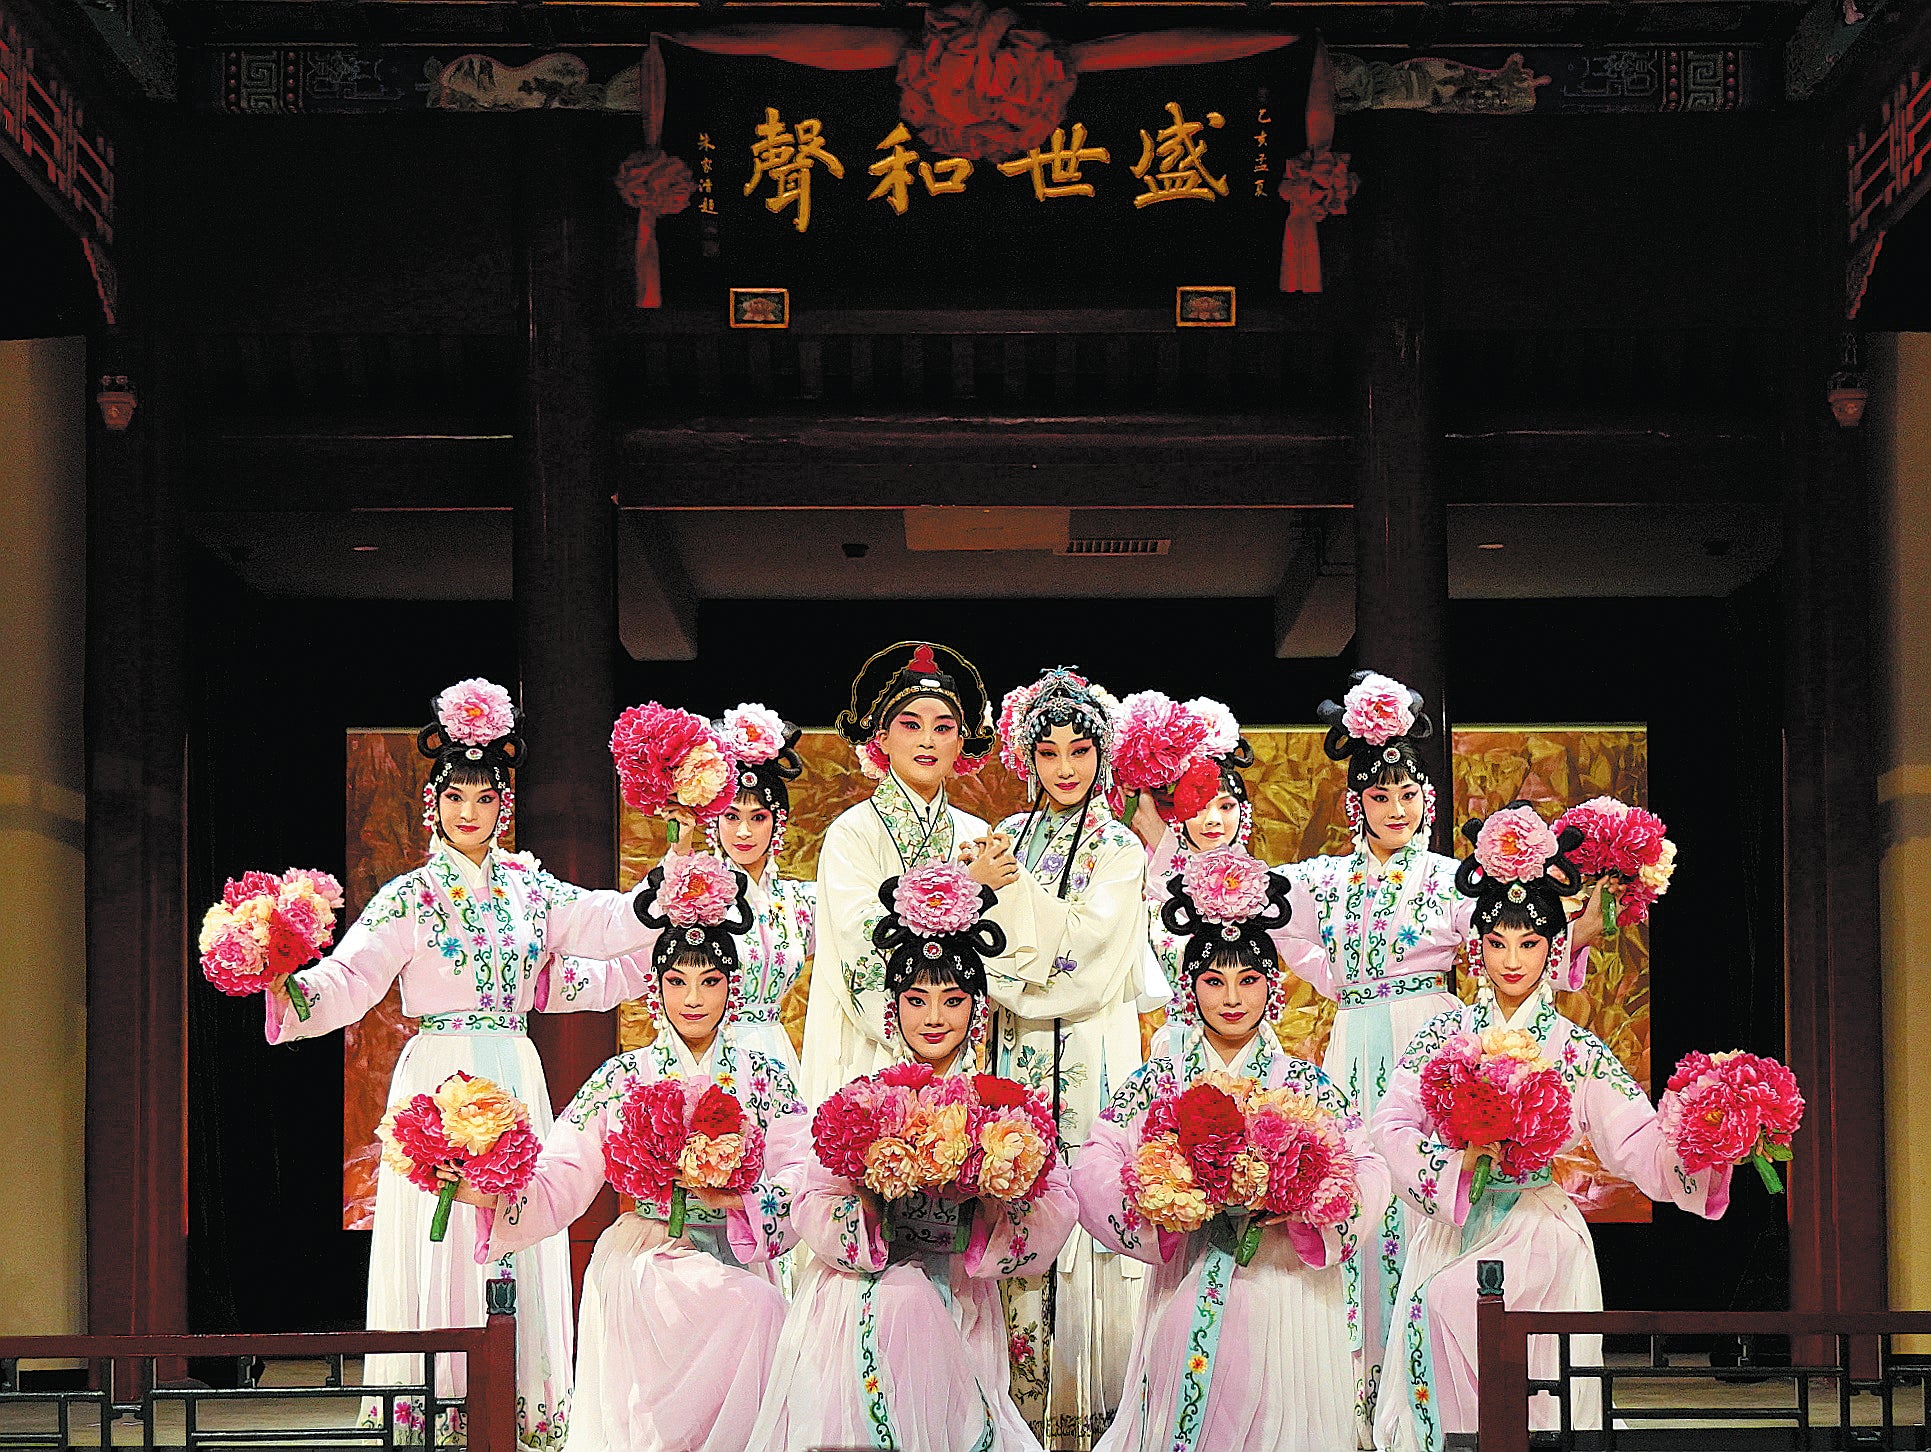 The Northern Kunqu Opera Theatre has devoted itself to promoting the traditional Chinese art form to global audiences over the years